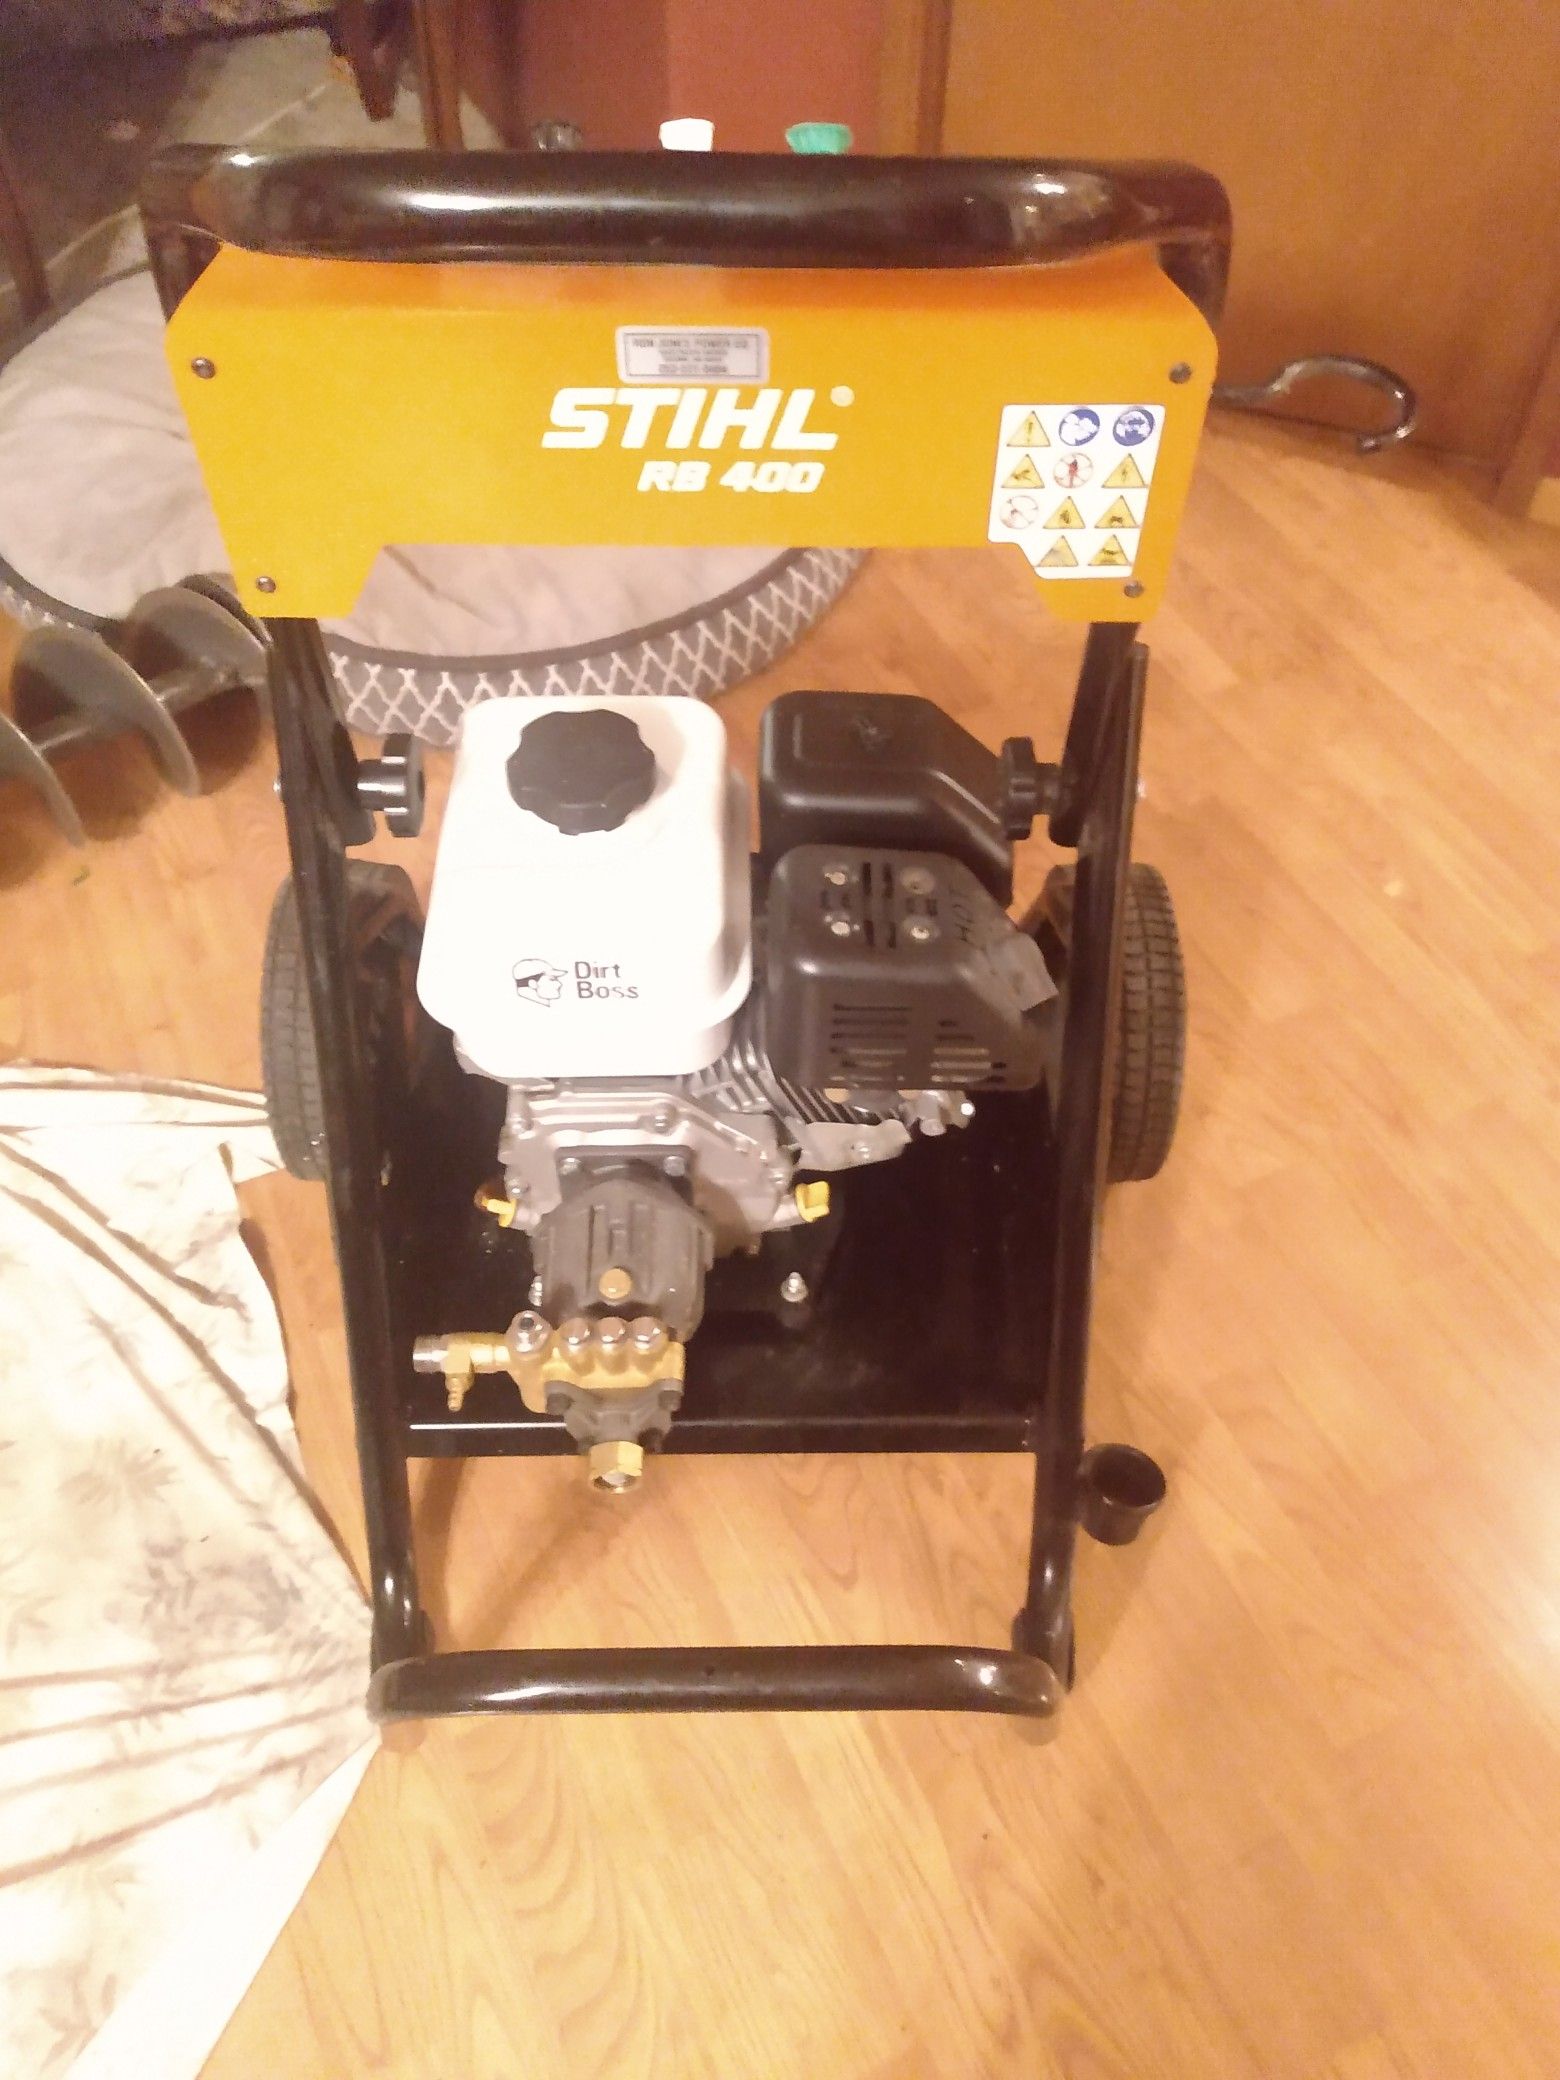 Sthil RB 400 Pressure washer .